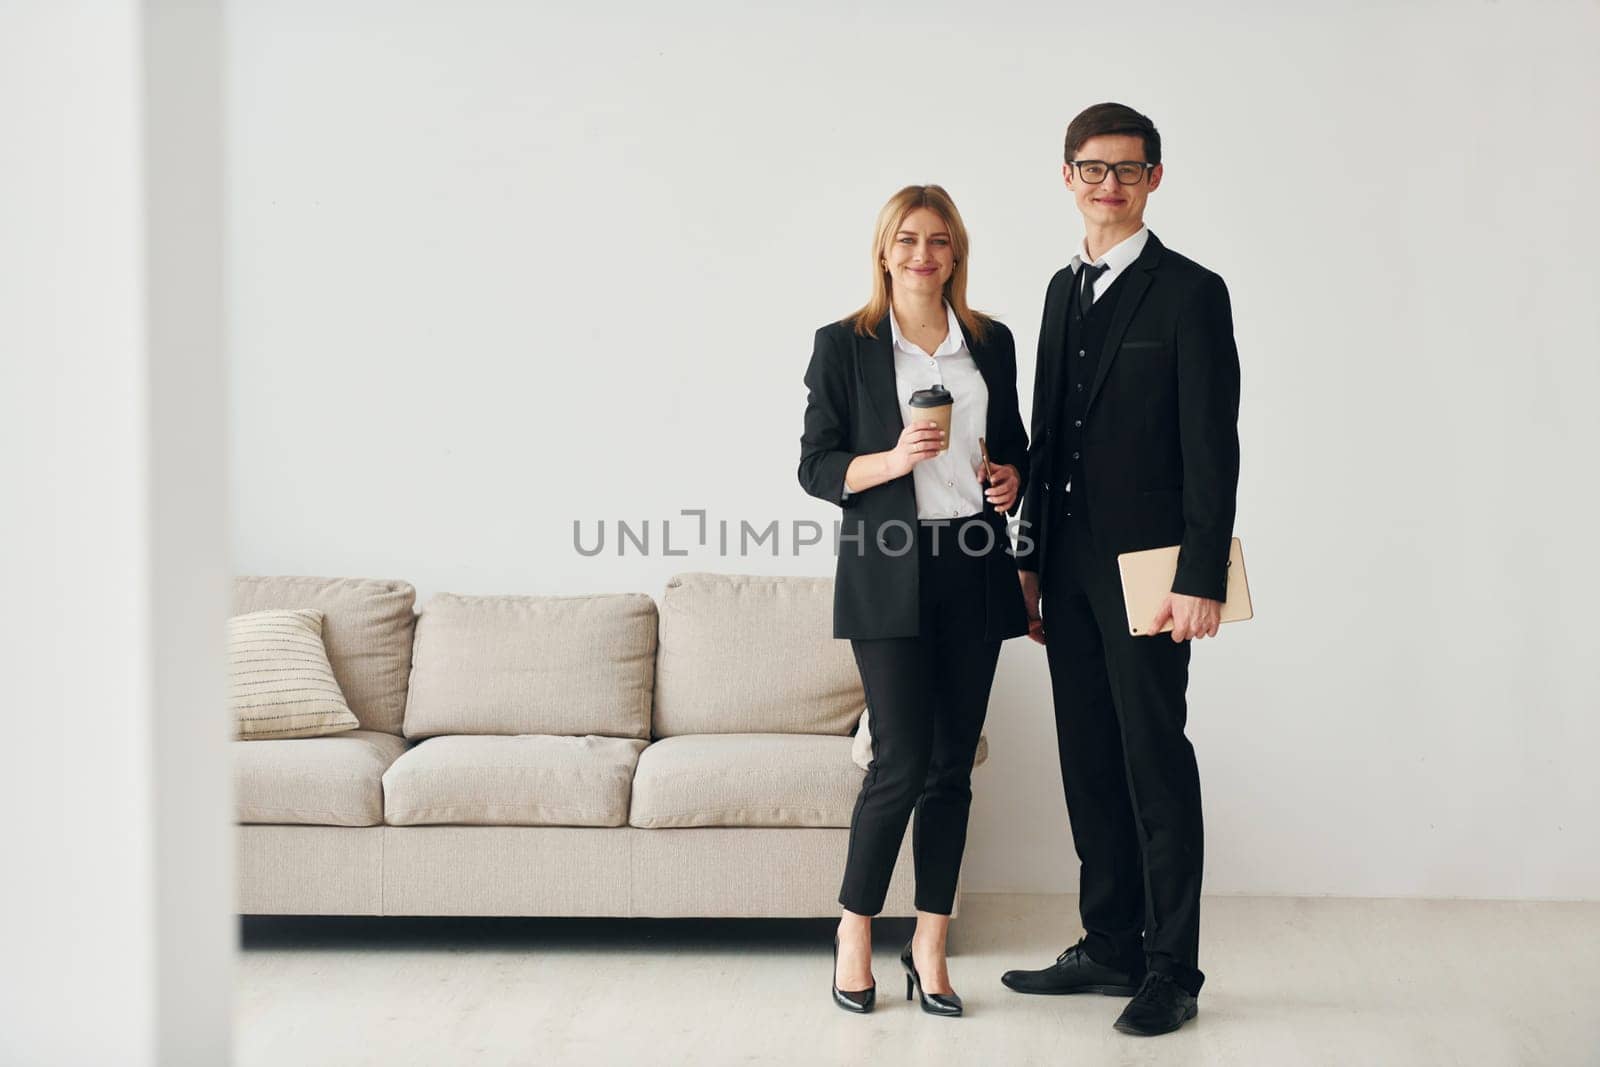 Young guys standing with woman indoors near sofa agaist white wall.